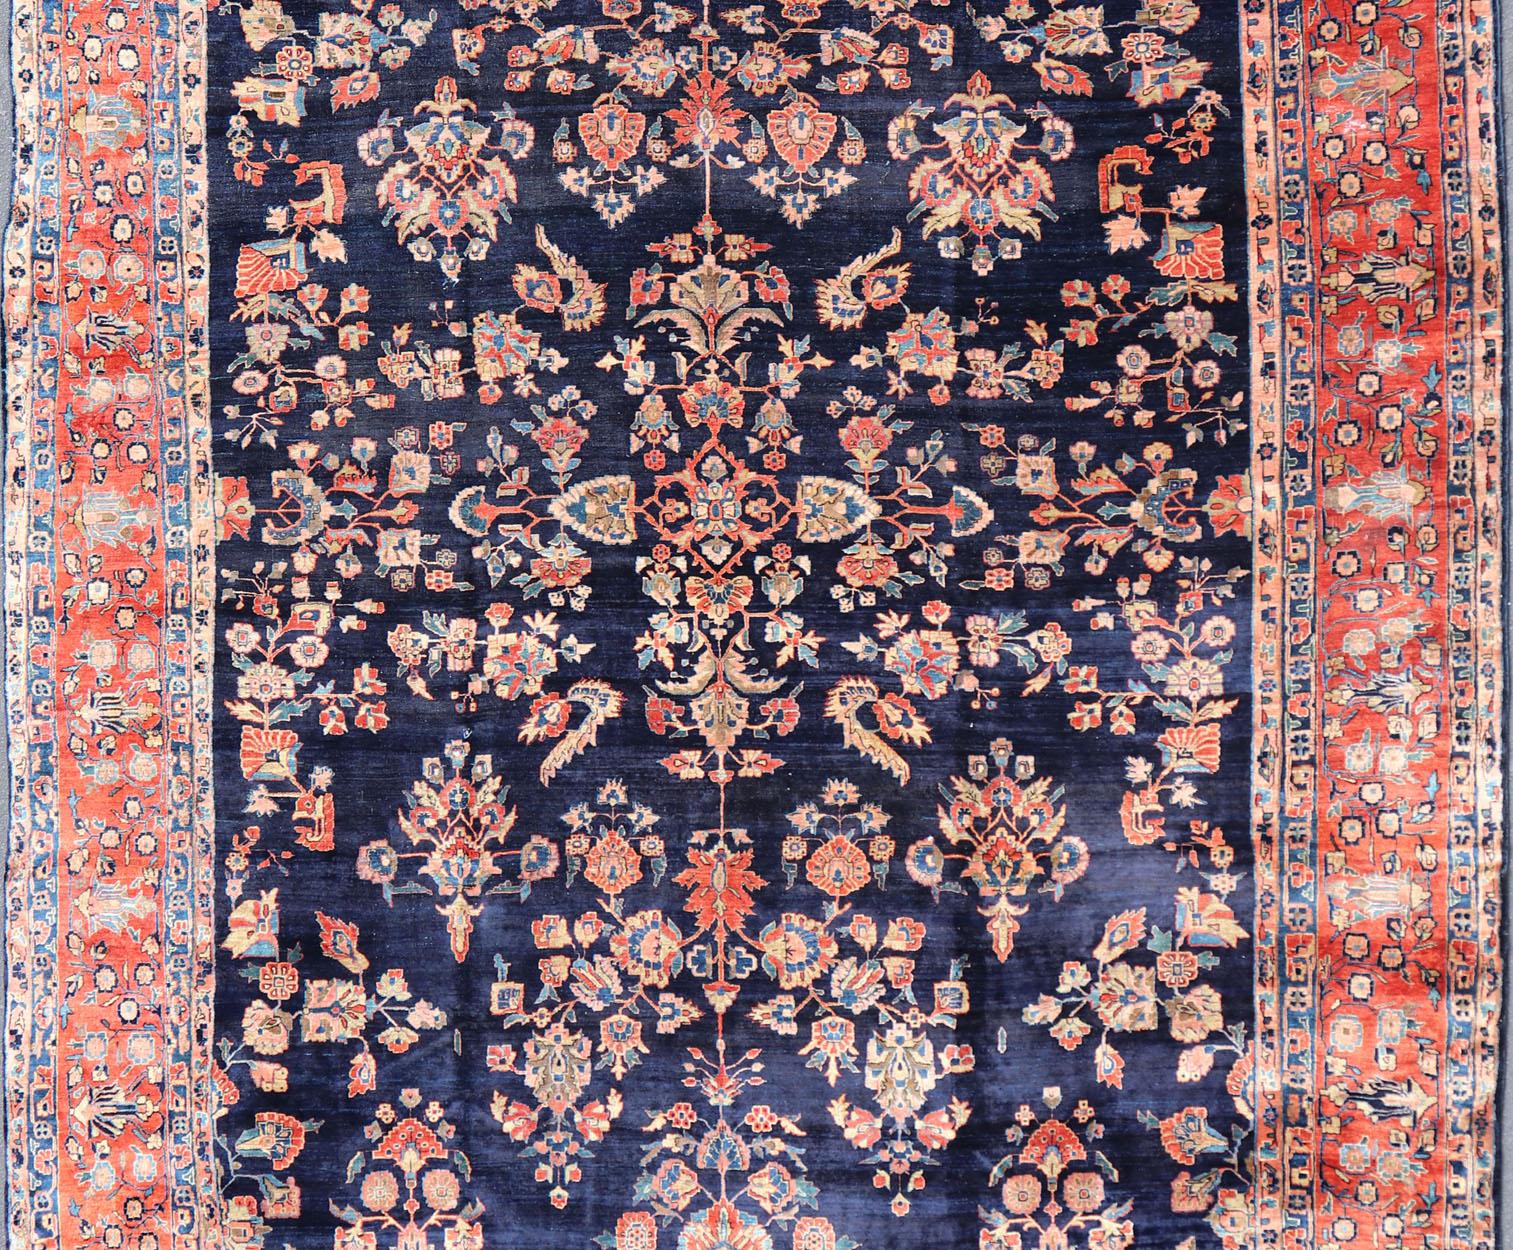 Persian Antique Large Sarouk Faraghan Rug with Floral Pattern in Navy and Orange-Red For Sale